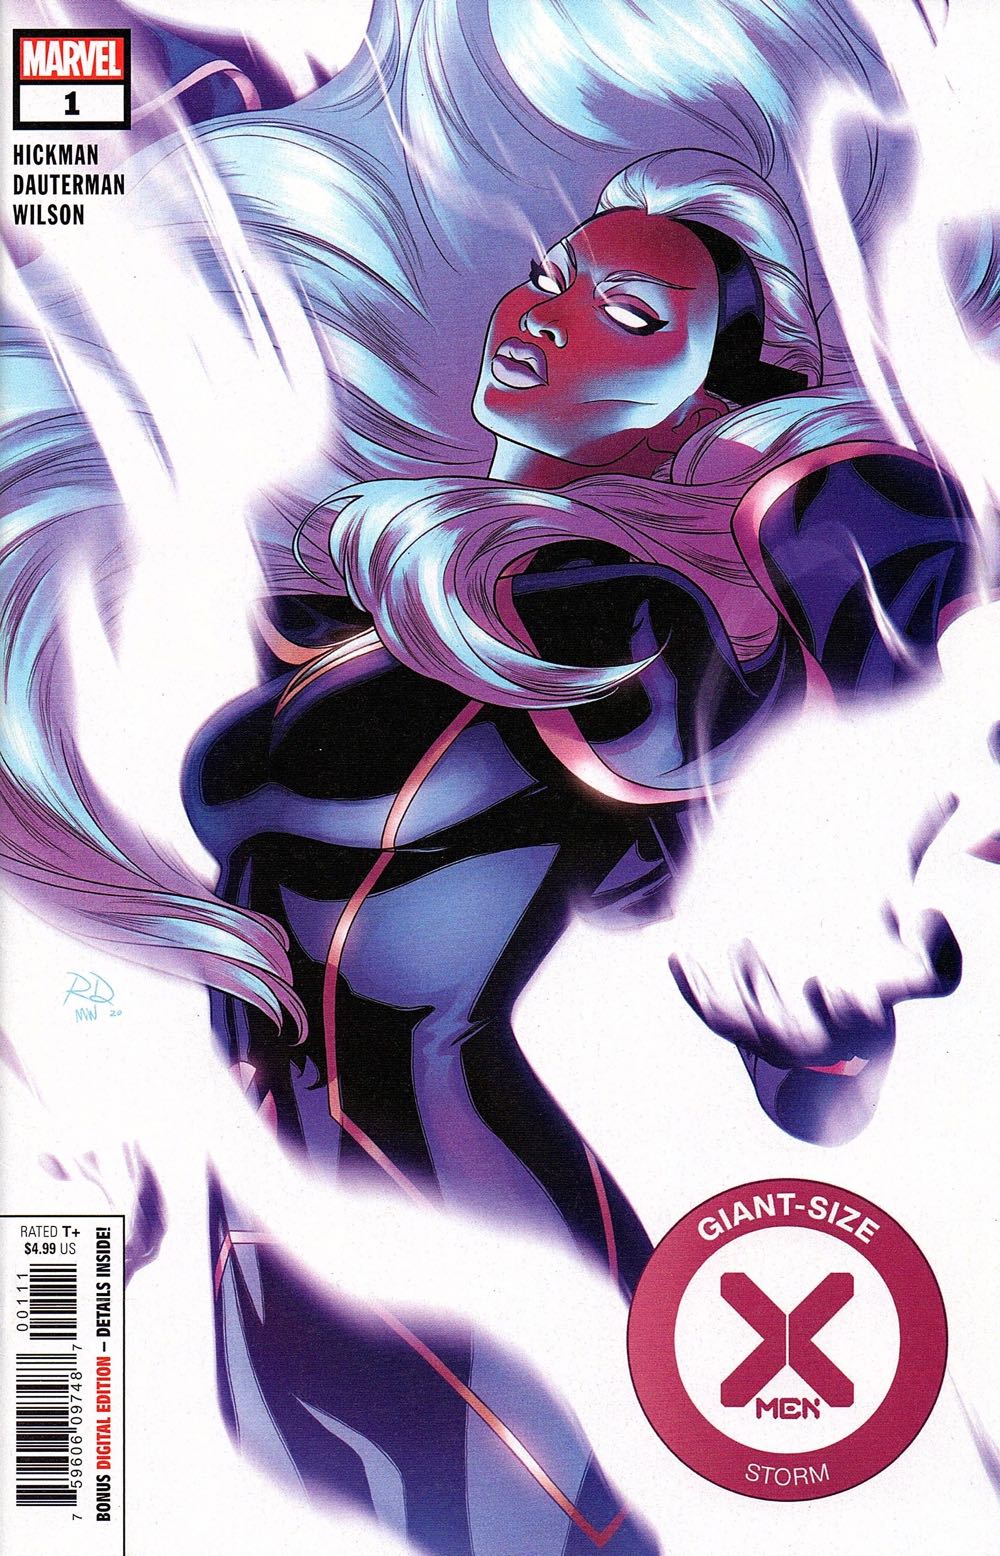 Giant-Size X-Men: Storm - Marvel (1 - Nov 2020) comic book collectible [Barcode 75960609748700111] - Main Image 1